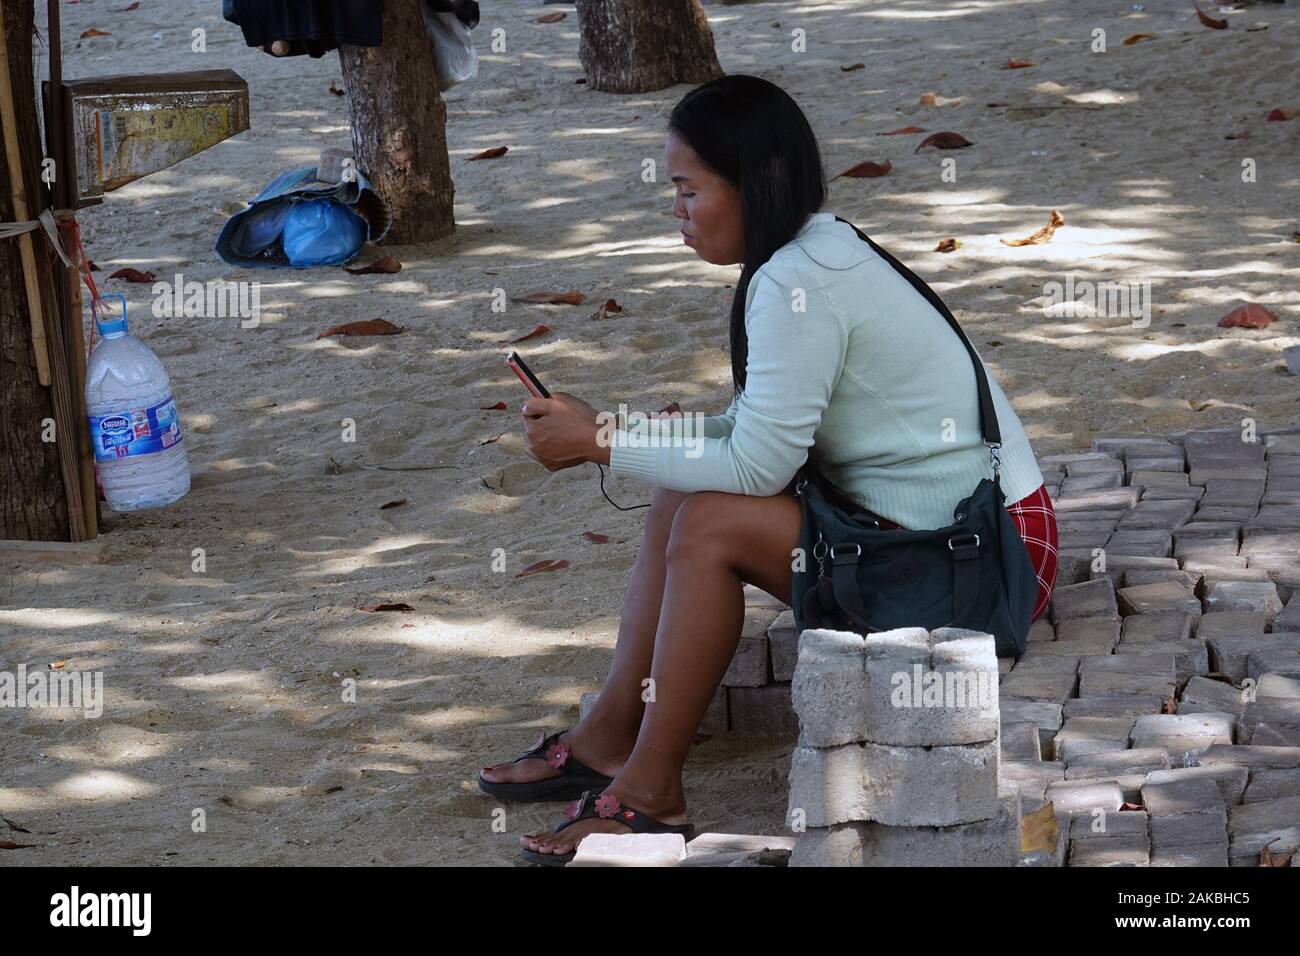 Pattaya, Thailand - December 24, 2019: Woman sitting on pavement tiles near beach and watching her phone. Stock Photo